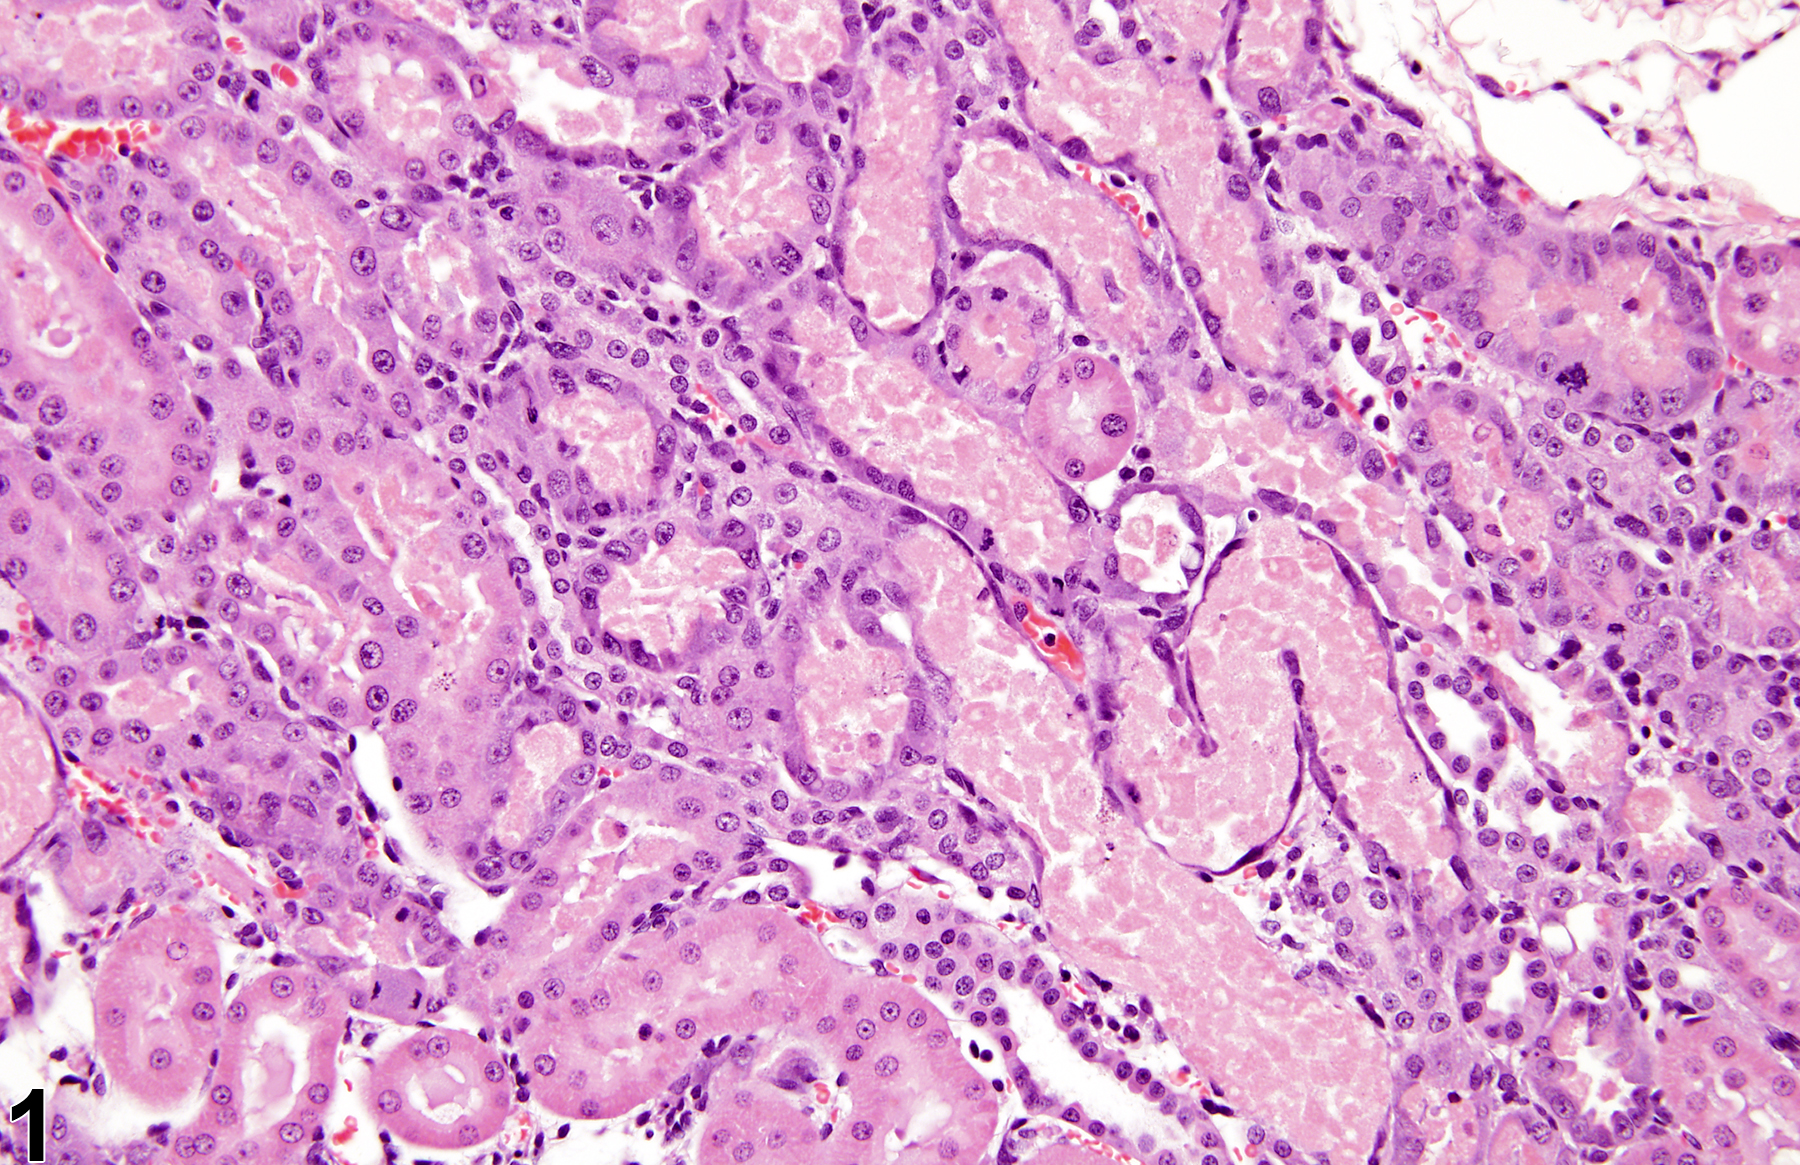 Image of renal tubule regeneration in the kidney from a male rat in an acute study